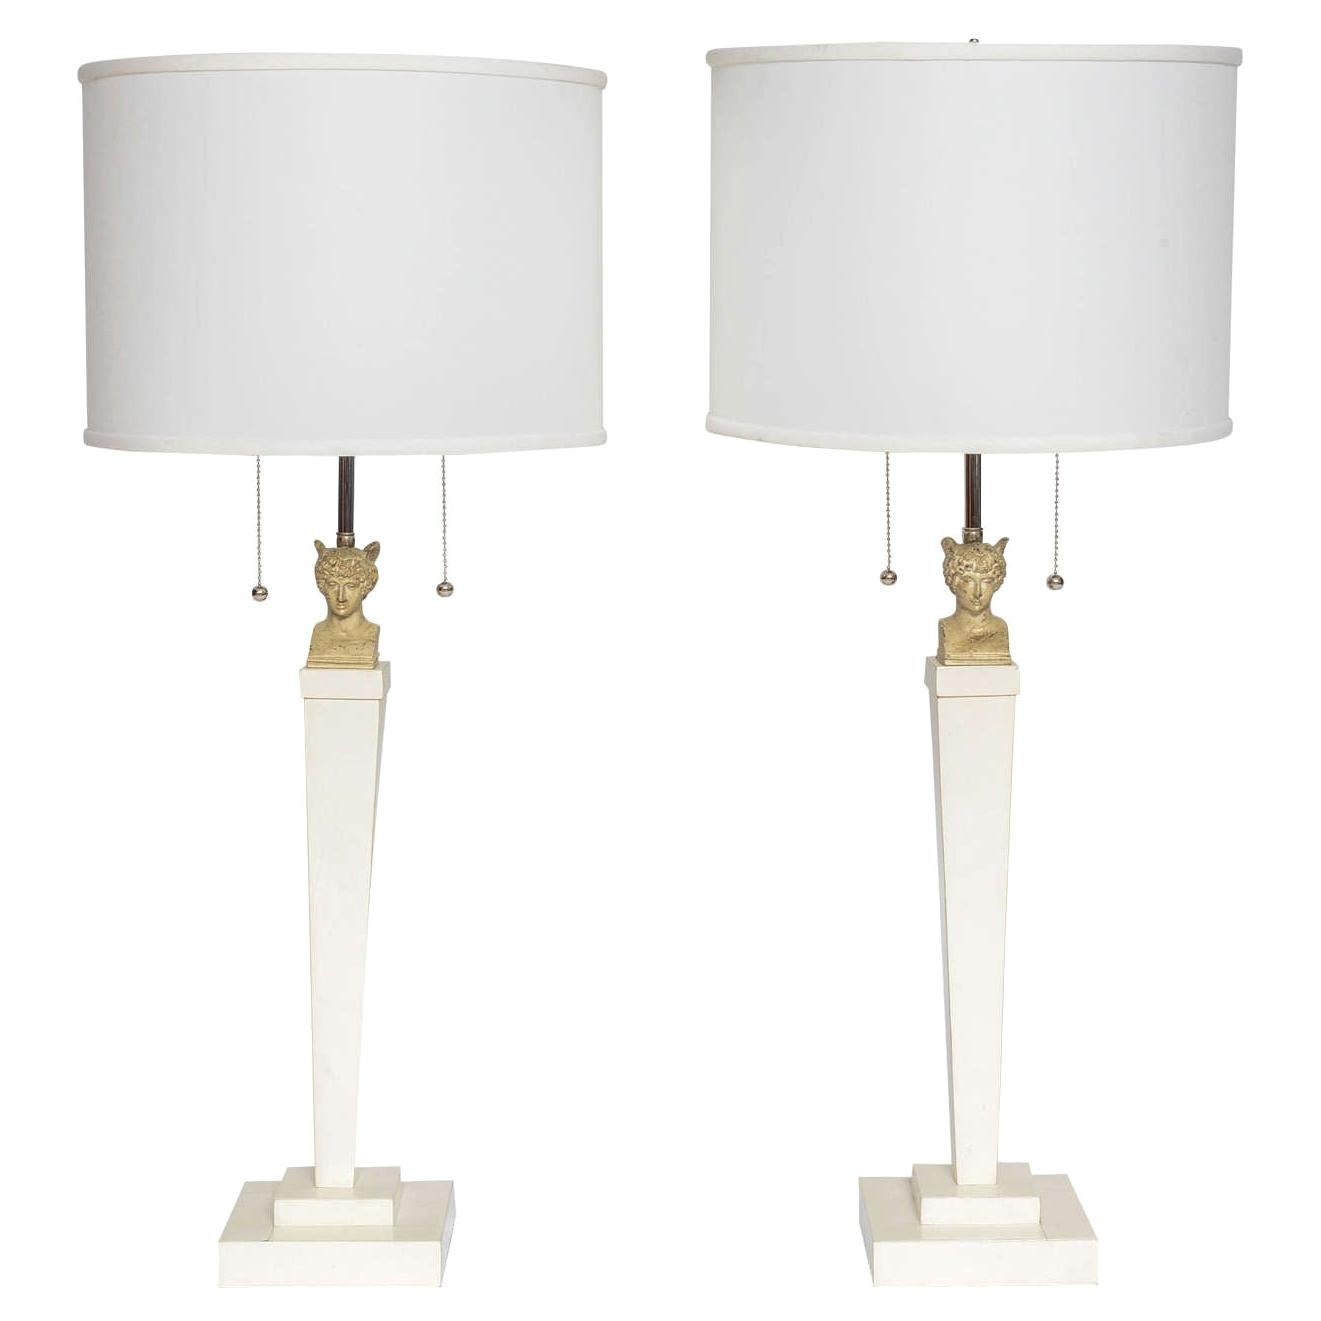 Vintage Italian Neoclassic Style Parchment Column Table Lamps, Pair